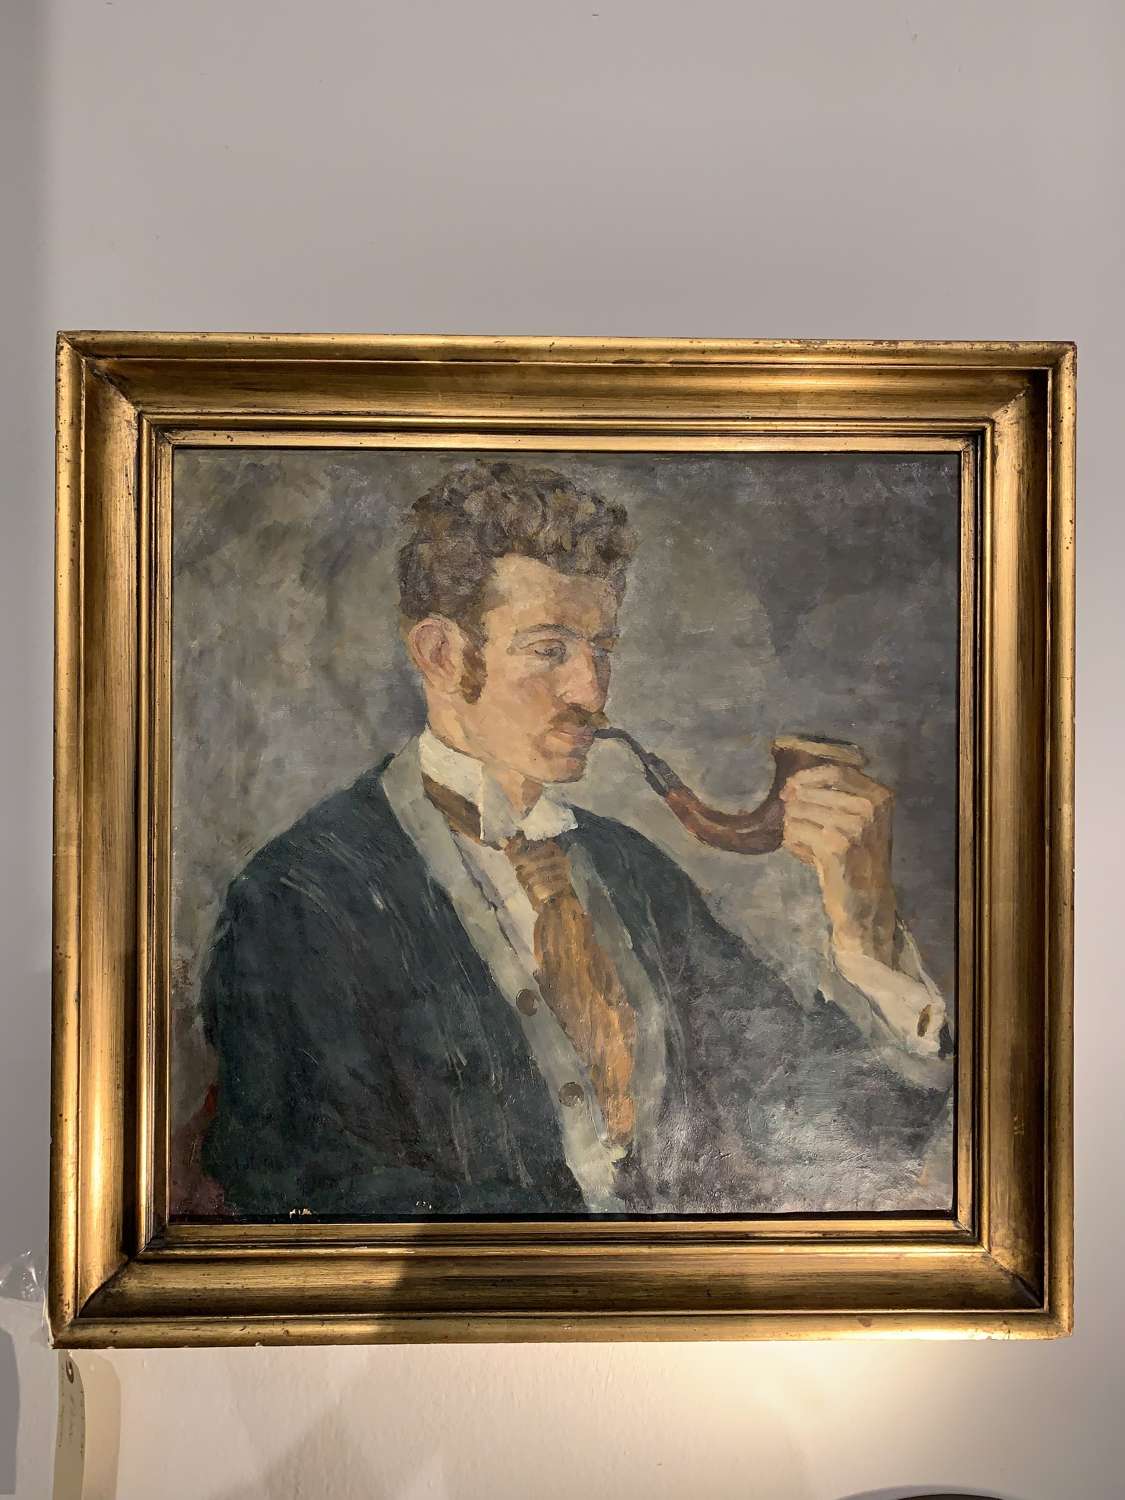 Early 20th century Swedish oil painting on canvas of a man with a pipe